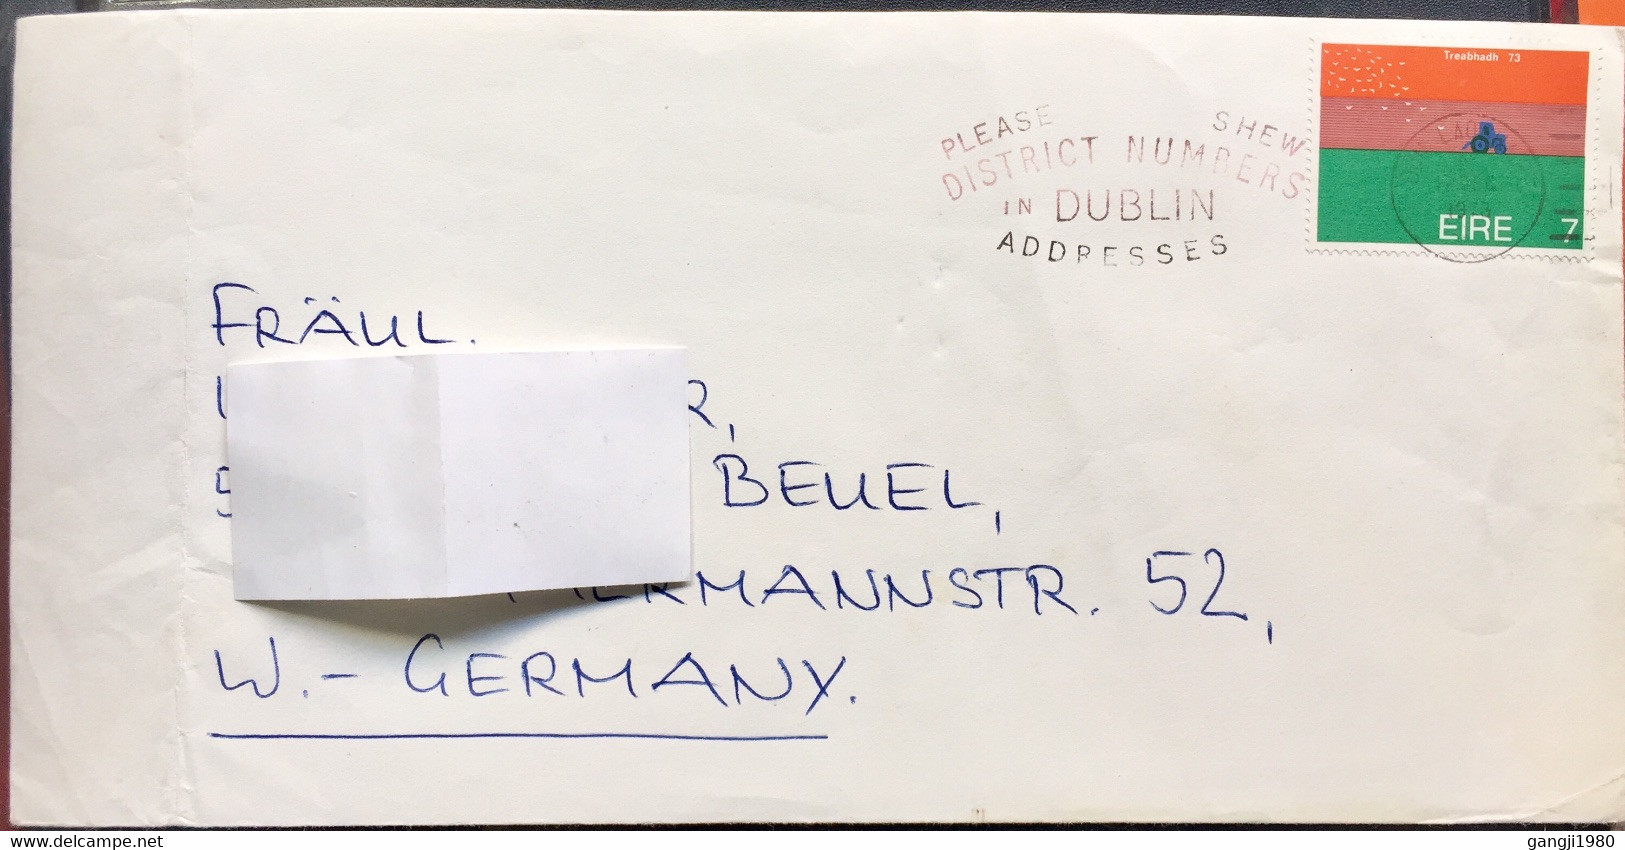 IRELAND 1973,POSTAL STATIONARY COVER, USED TO GERMANY, COLOUR SLOGAN, PLEASE SHEW DISTRICT NUMBER IN DUBLIN ADDRESSES - Enteros Postales